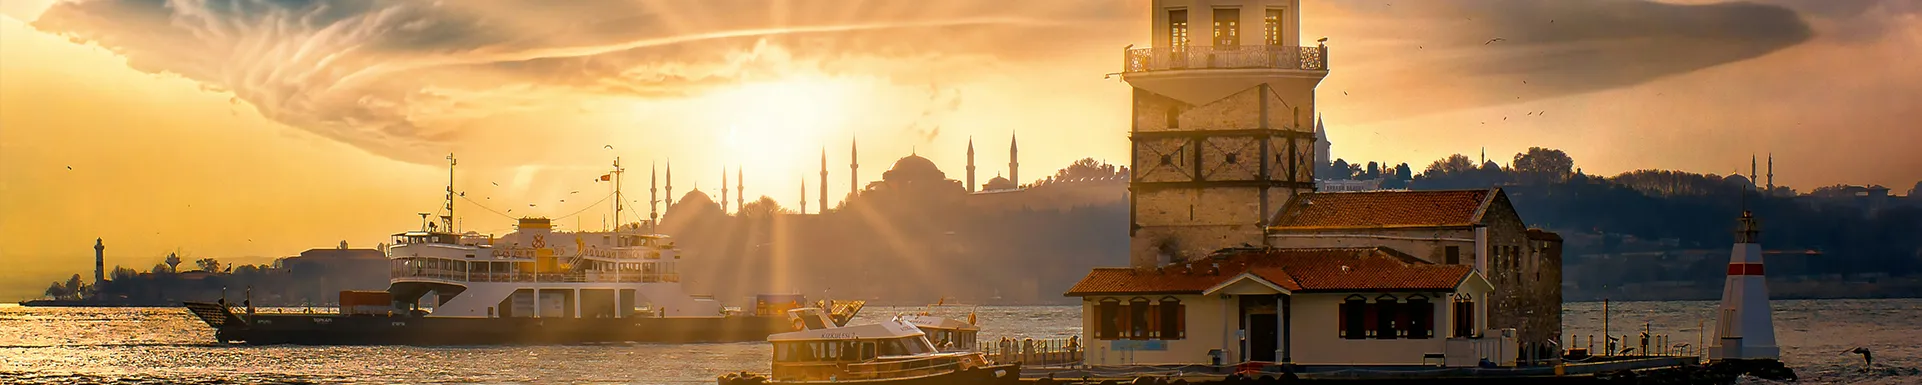 City of Istanbul - web banner